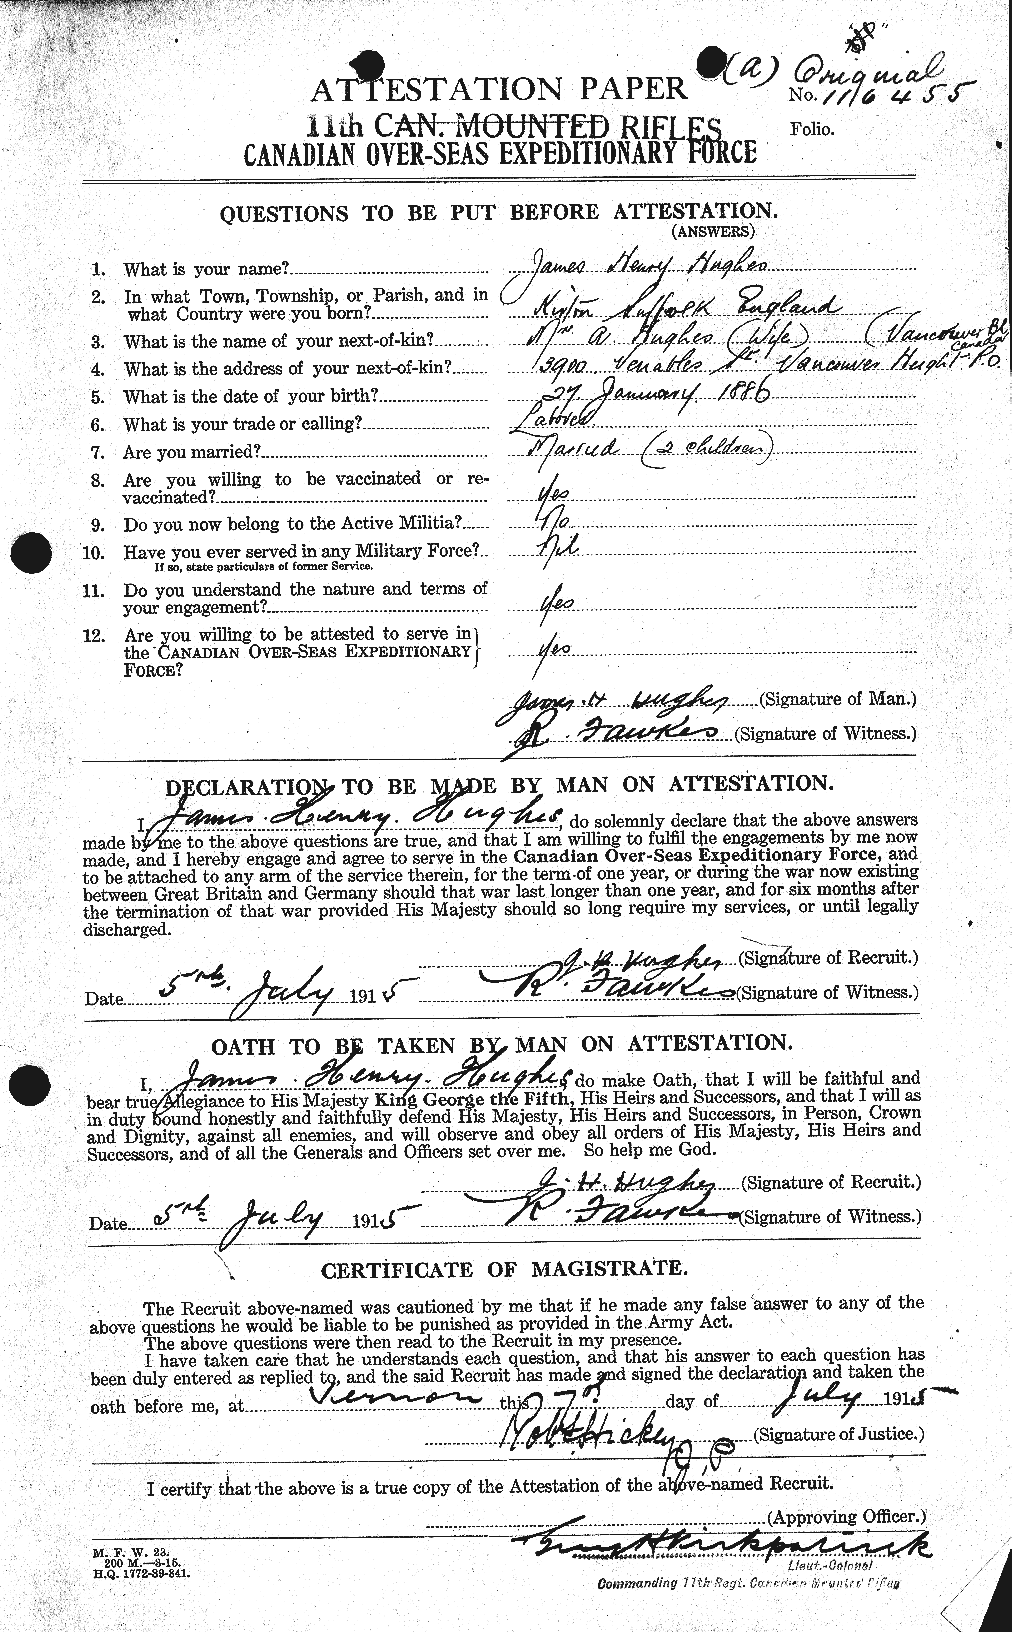 Personnel Records of the First World War - CEF 403963a